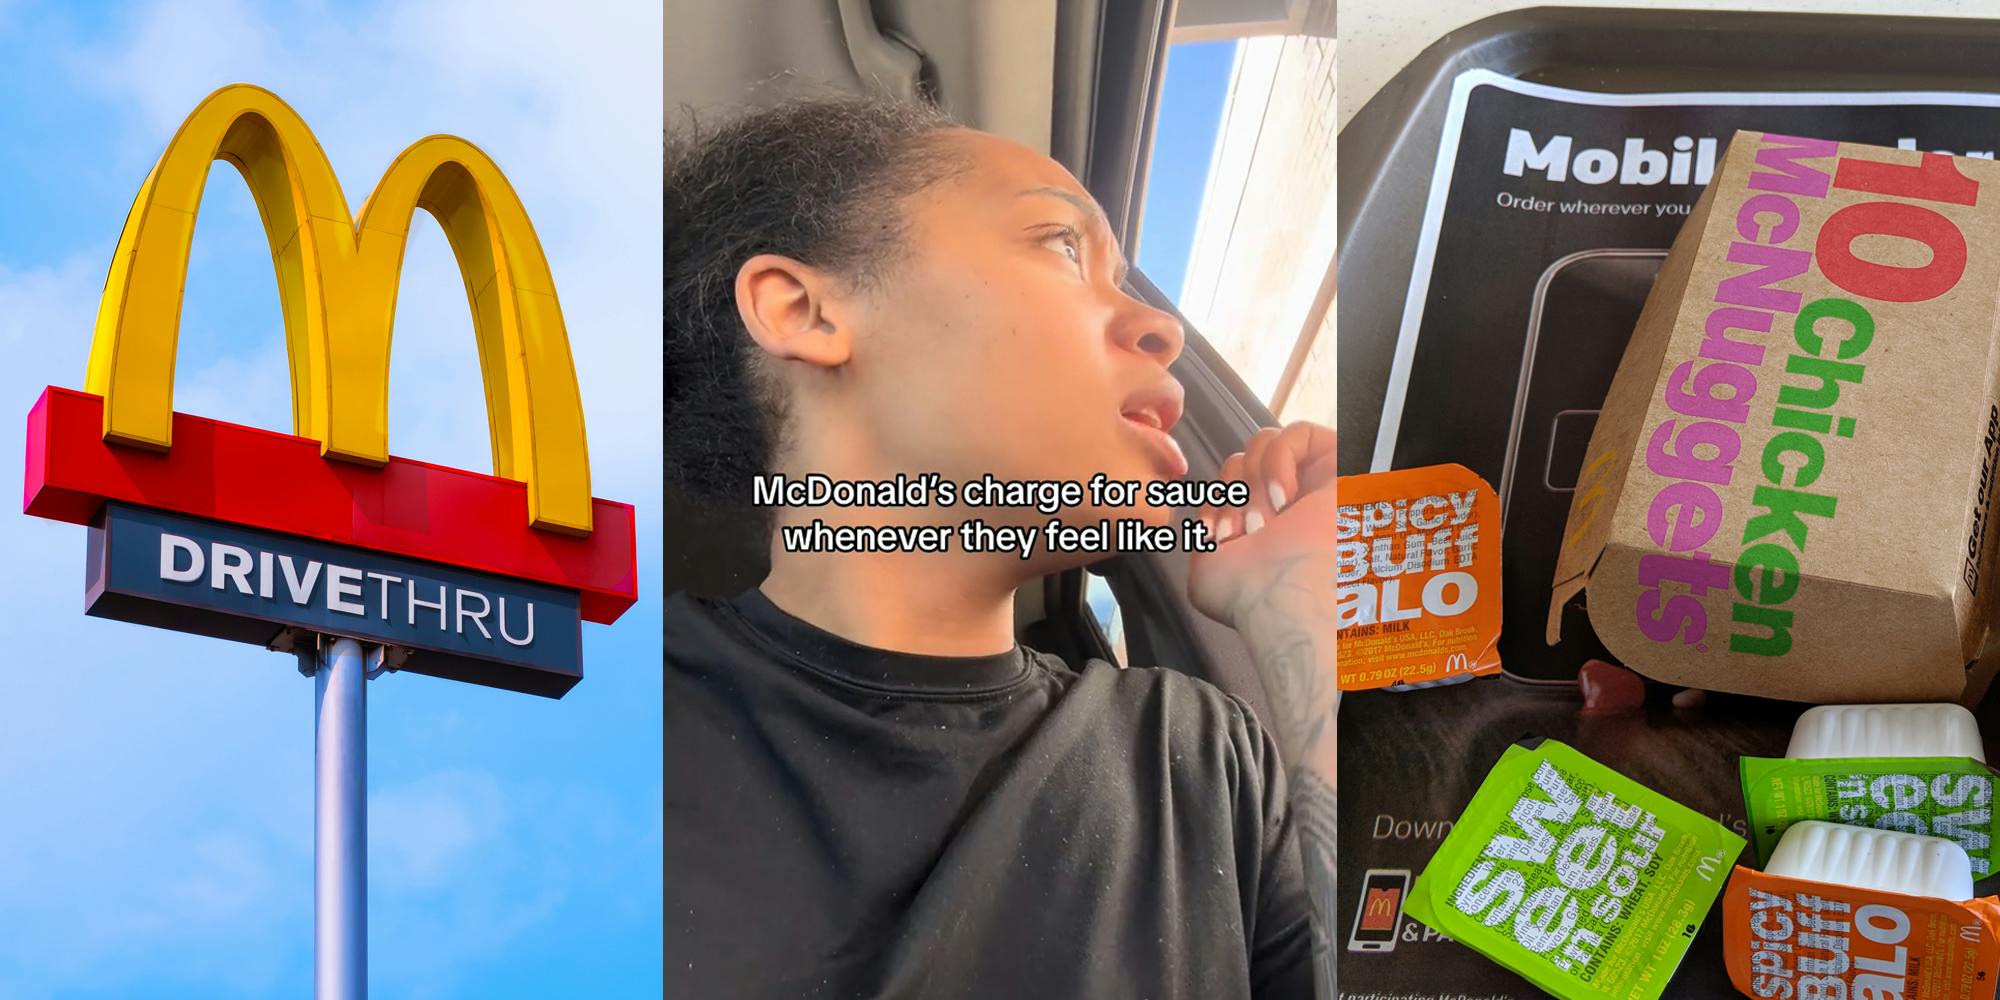 Customer Says McDonald's Charges for Sauce 'Whenever They Feel Like It'